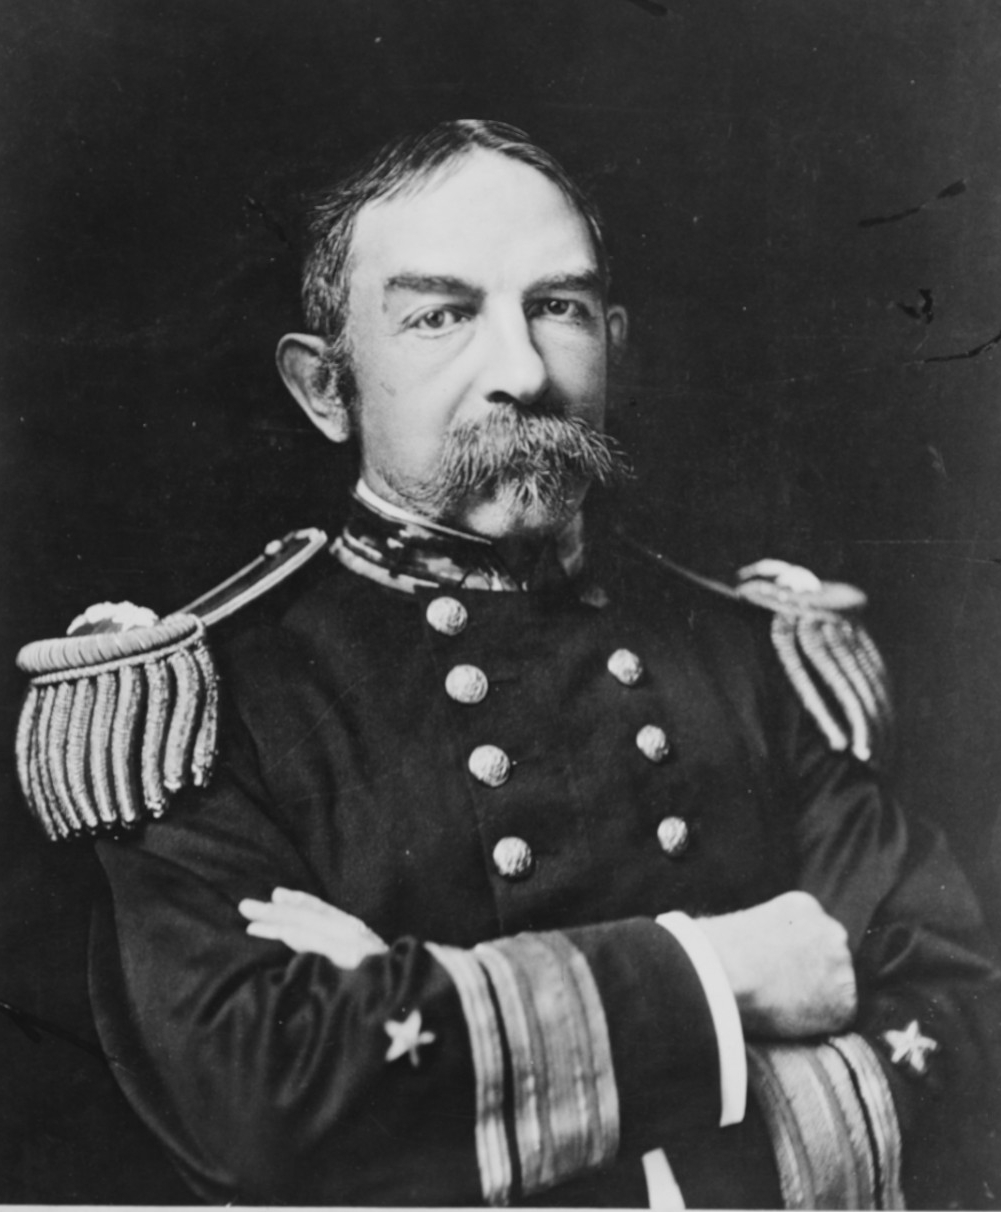 A photo of  Commo. Arent S. Crowninshield who was the chief of the Bureau of Navigation.